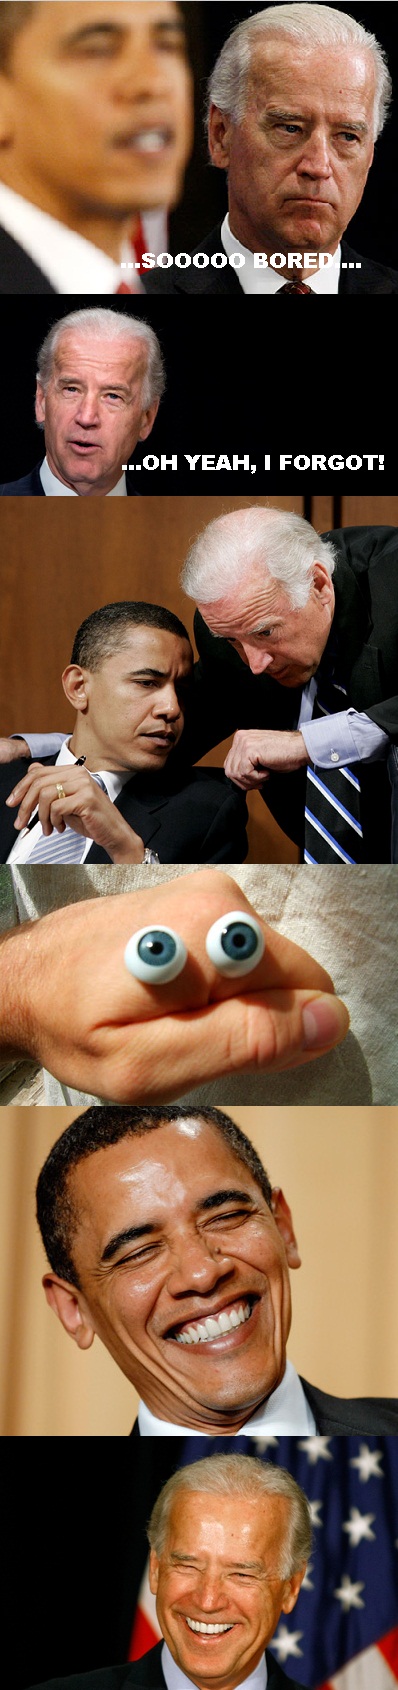 and derpy Obama